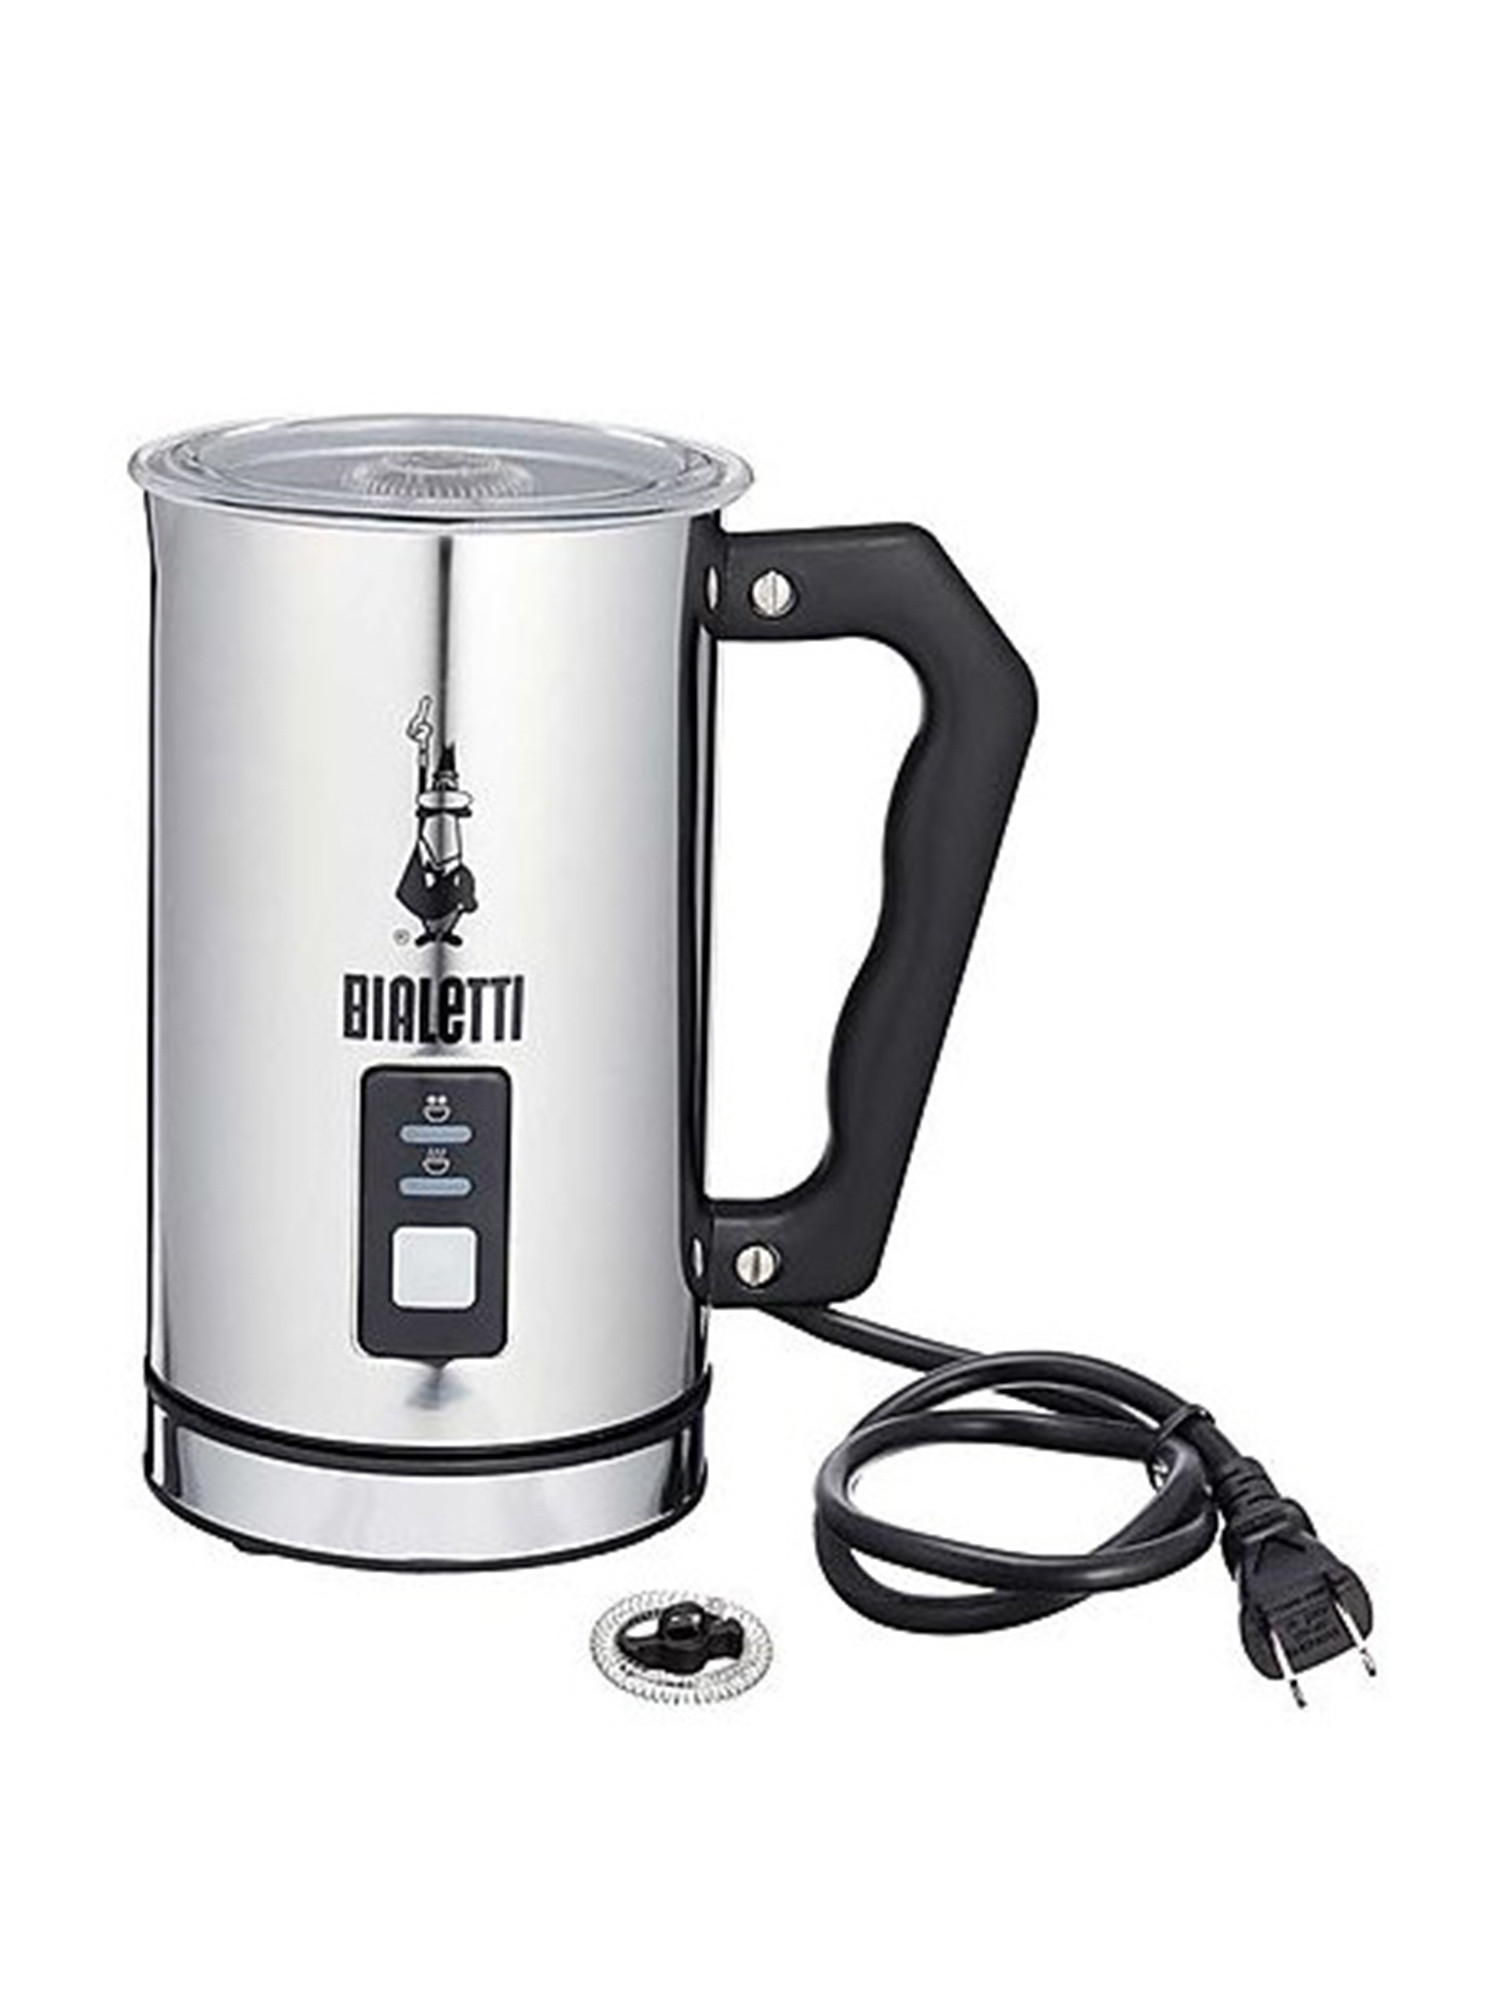 Bialetti - Milk Frother, Grigio, large image number 0